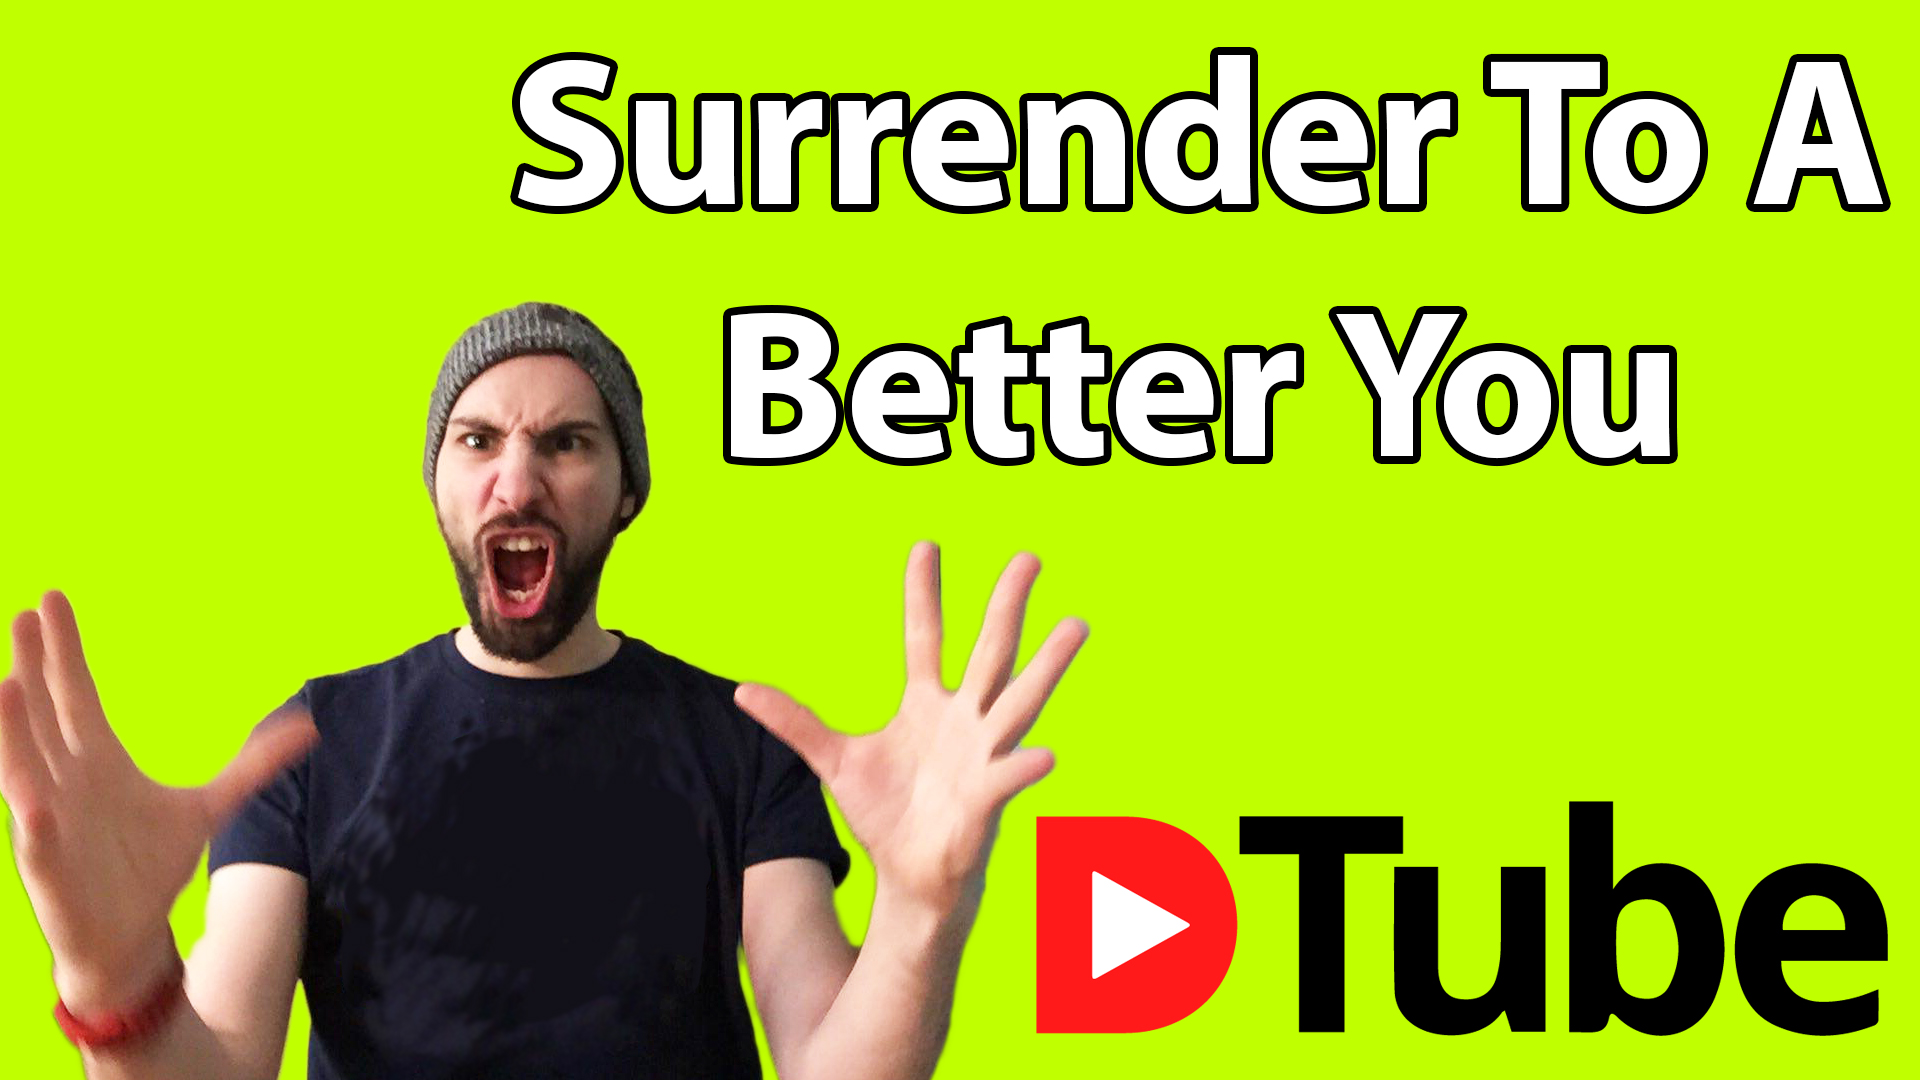 surrender-to-a-better-you.jpg